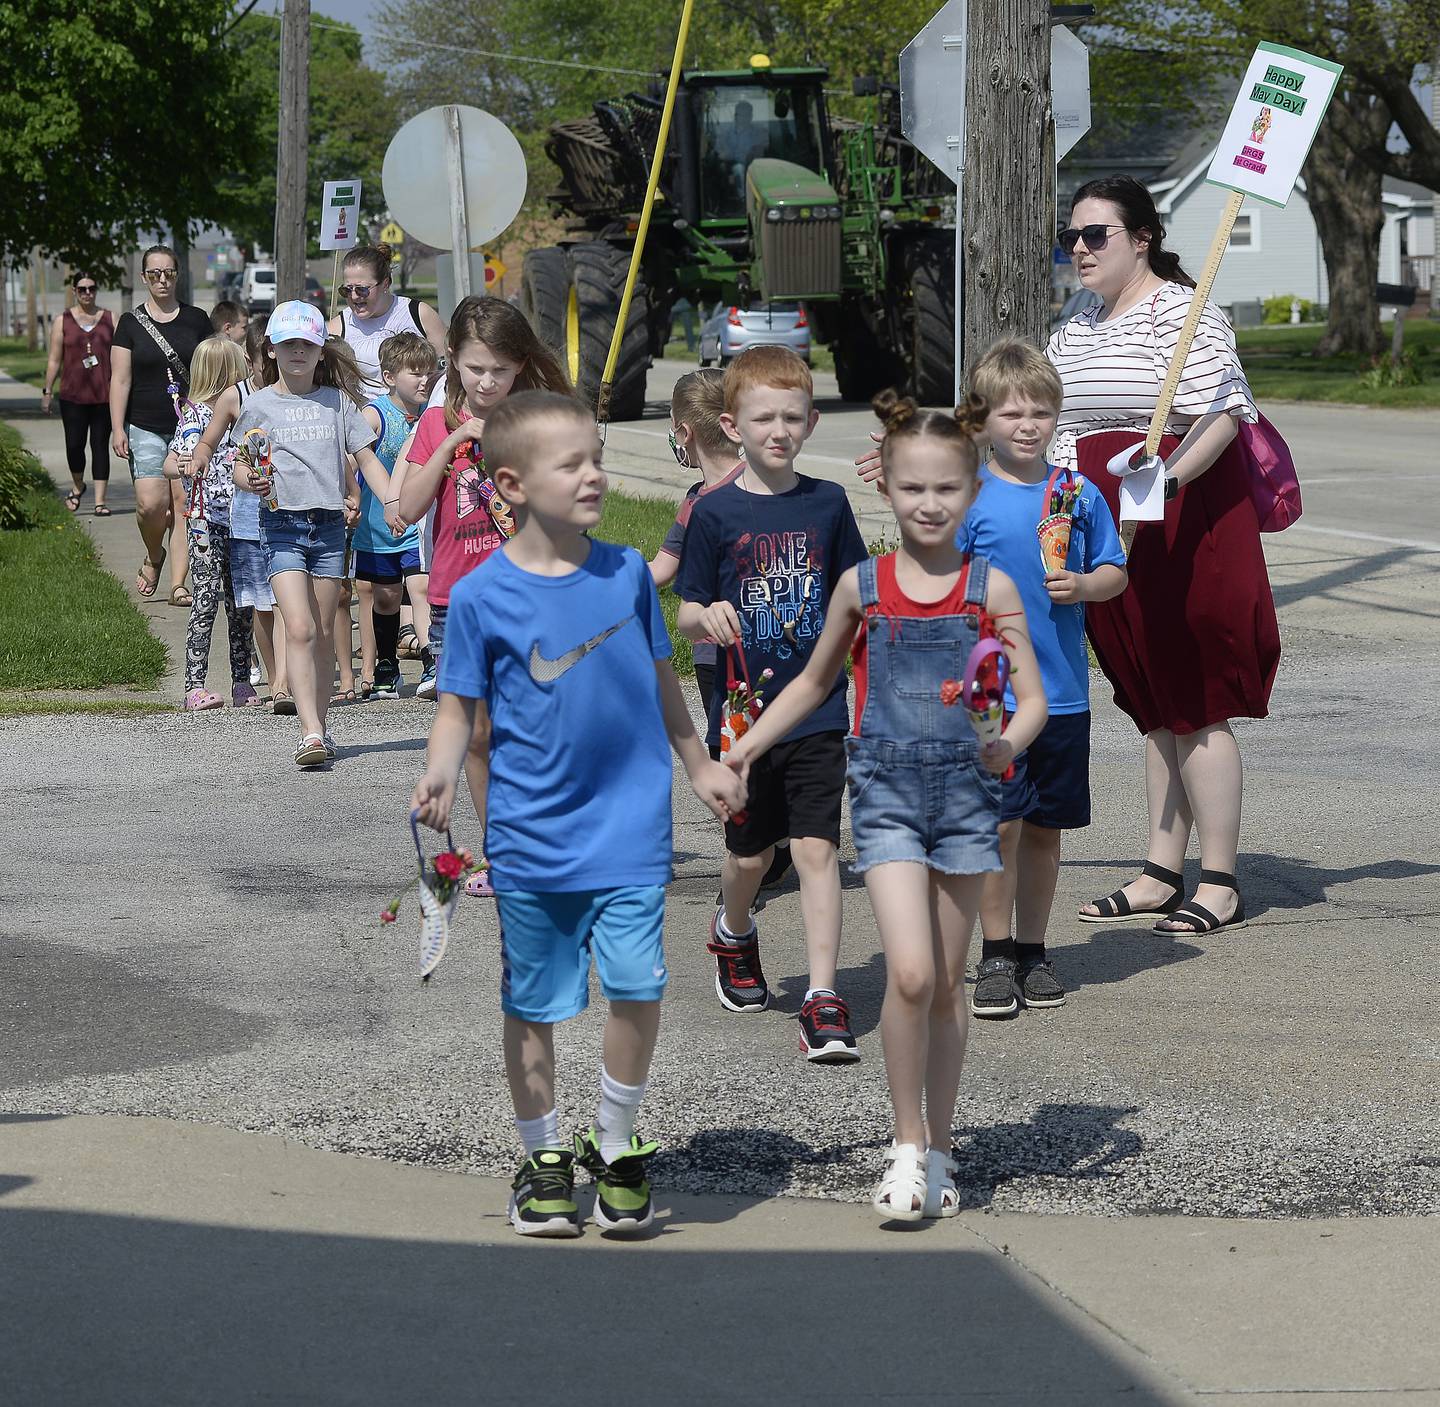 After leaving Grand Ridge Grade School, kindergarten through second grade students walk through the village Thursday, May 12, 2022, delivering May baskets to residents.